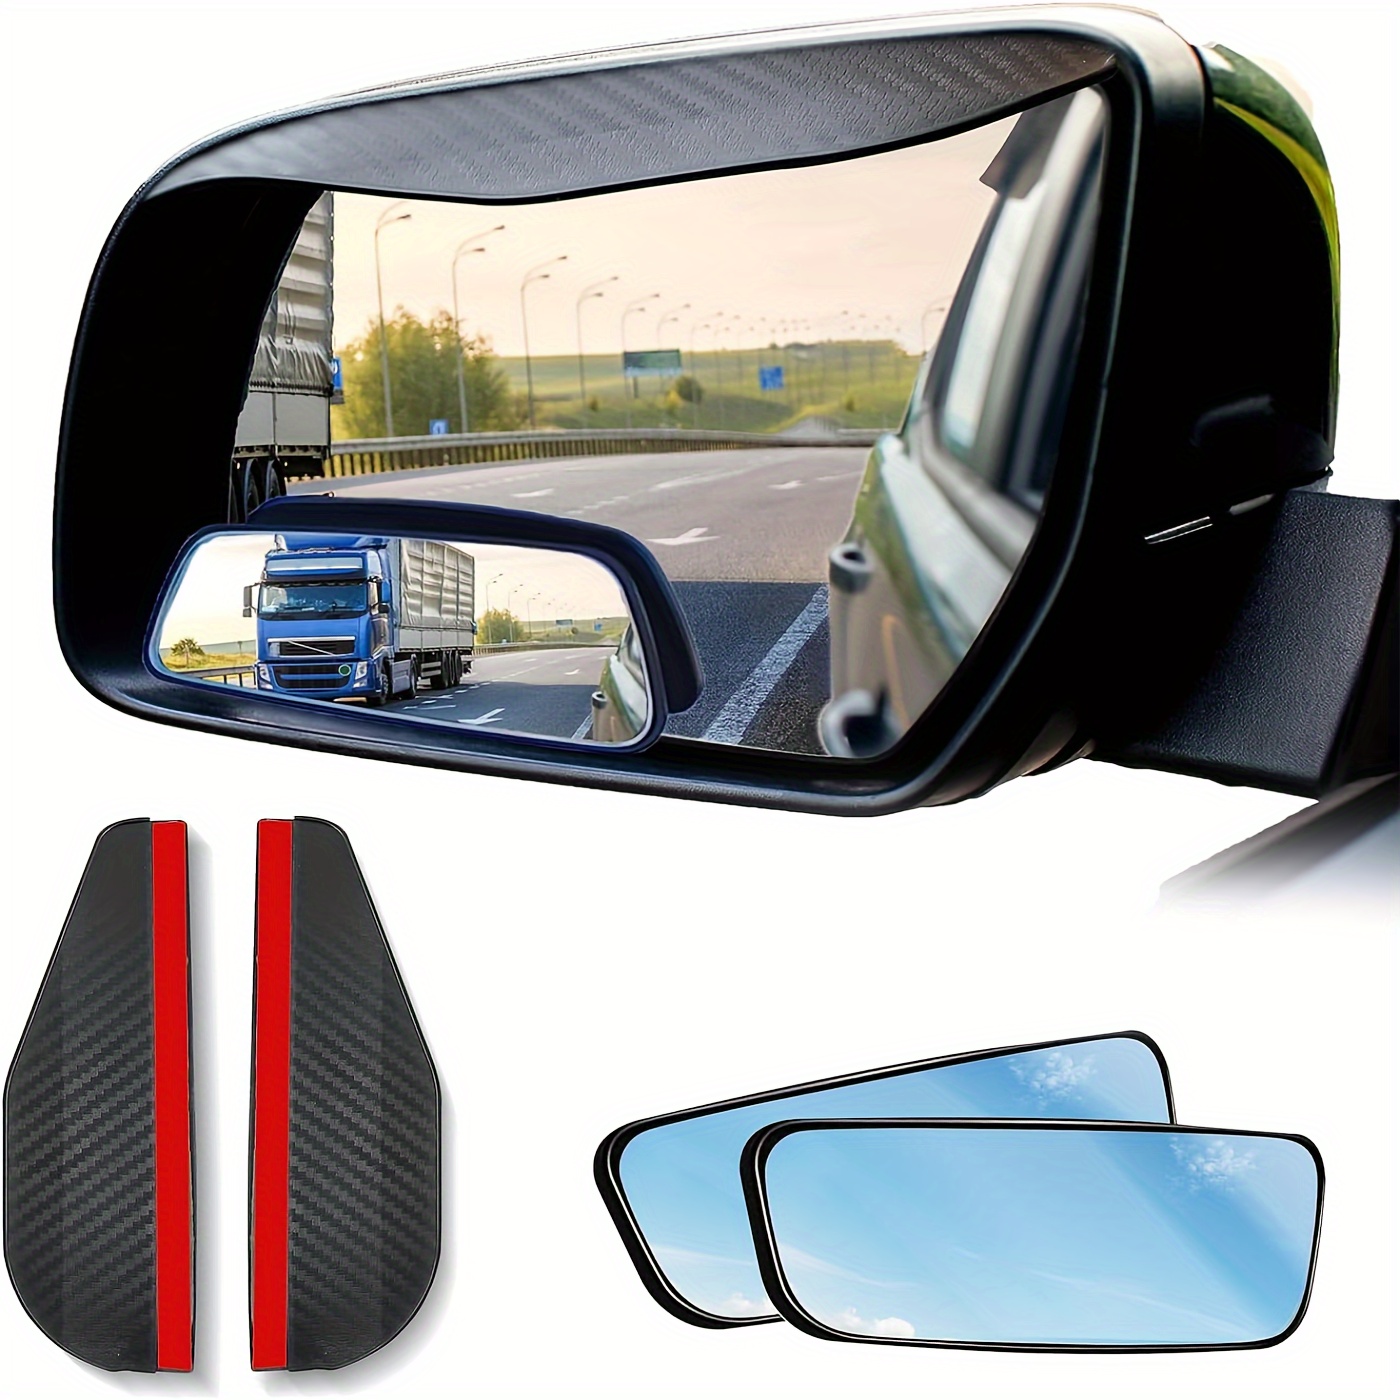 

4-pack Fit Wide Angle Car Rearview Mirrors With 3x View & Rain Covers - Adjustable Blind Spot Side Mirrors For Cars, Suvs, Trucks Car Rear View Mirror Accessories Rear View Mirror For Car